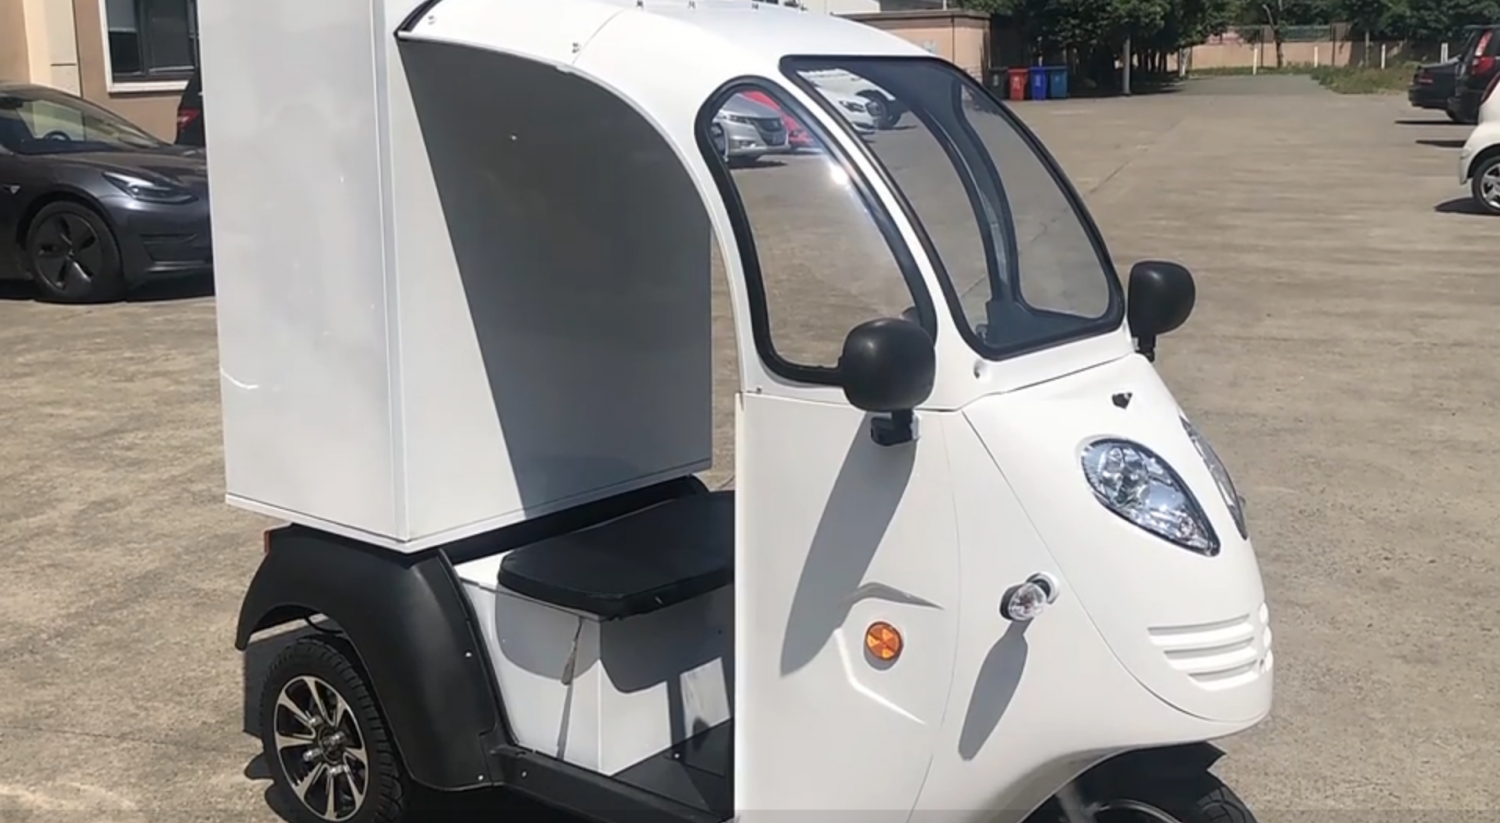 Alibaba showcases world's smallest fast food delivery truck as a tricycle. 